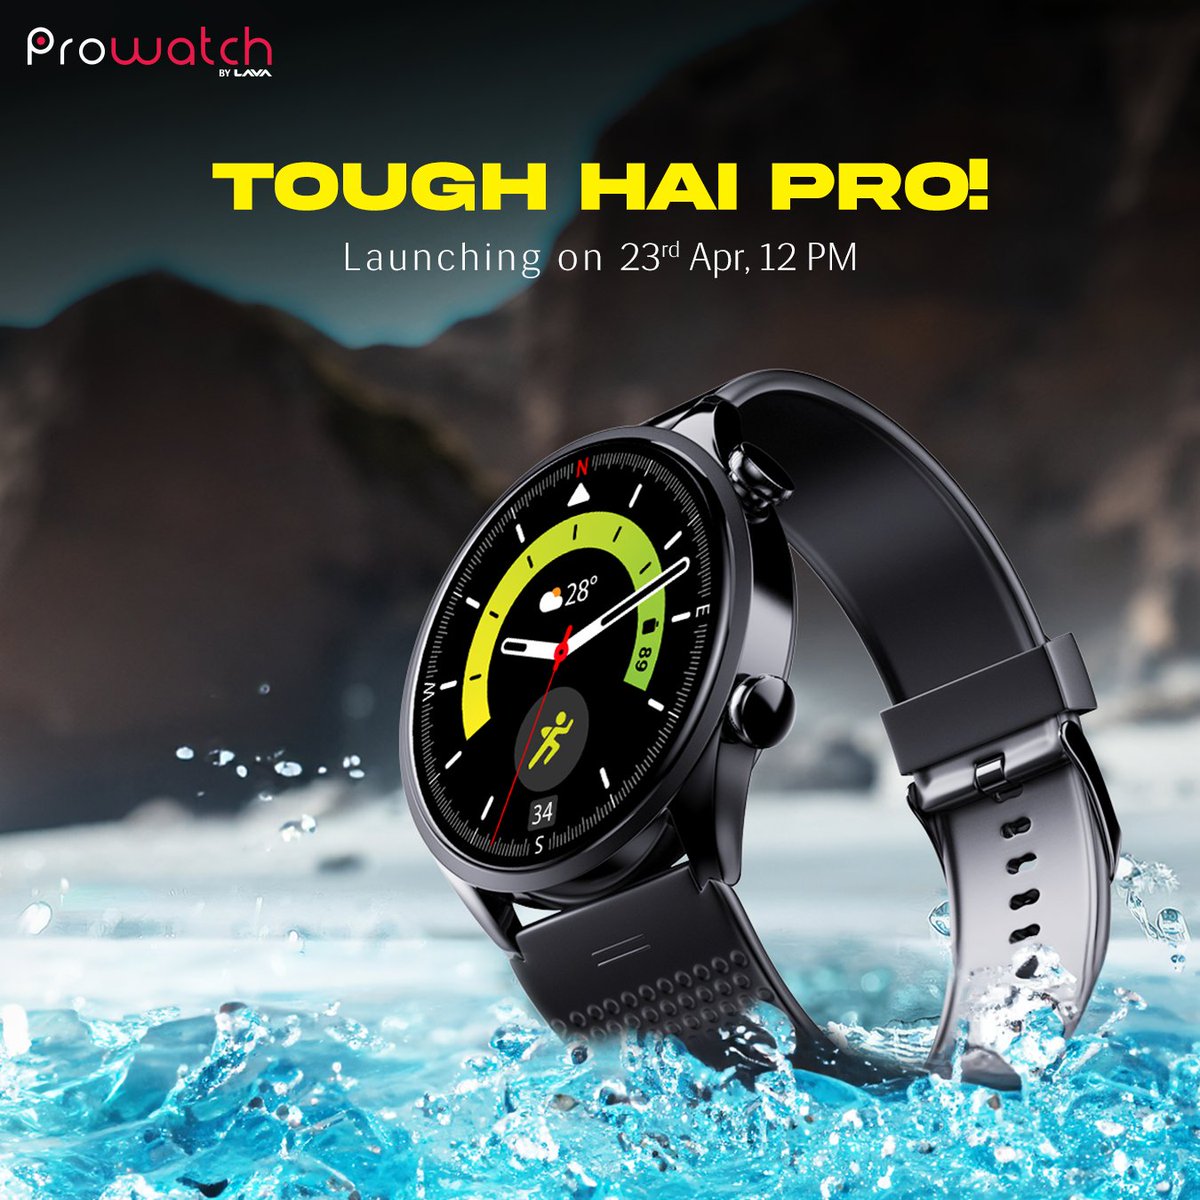 Prowatch: 2 days to go to witness the PRO champ! It's time for PRO! Launching on 23rd April at 12 PM. Register now & Win*: bit.ly/4cRB0ol #ToughHaiPro #ProWatch #Prozone